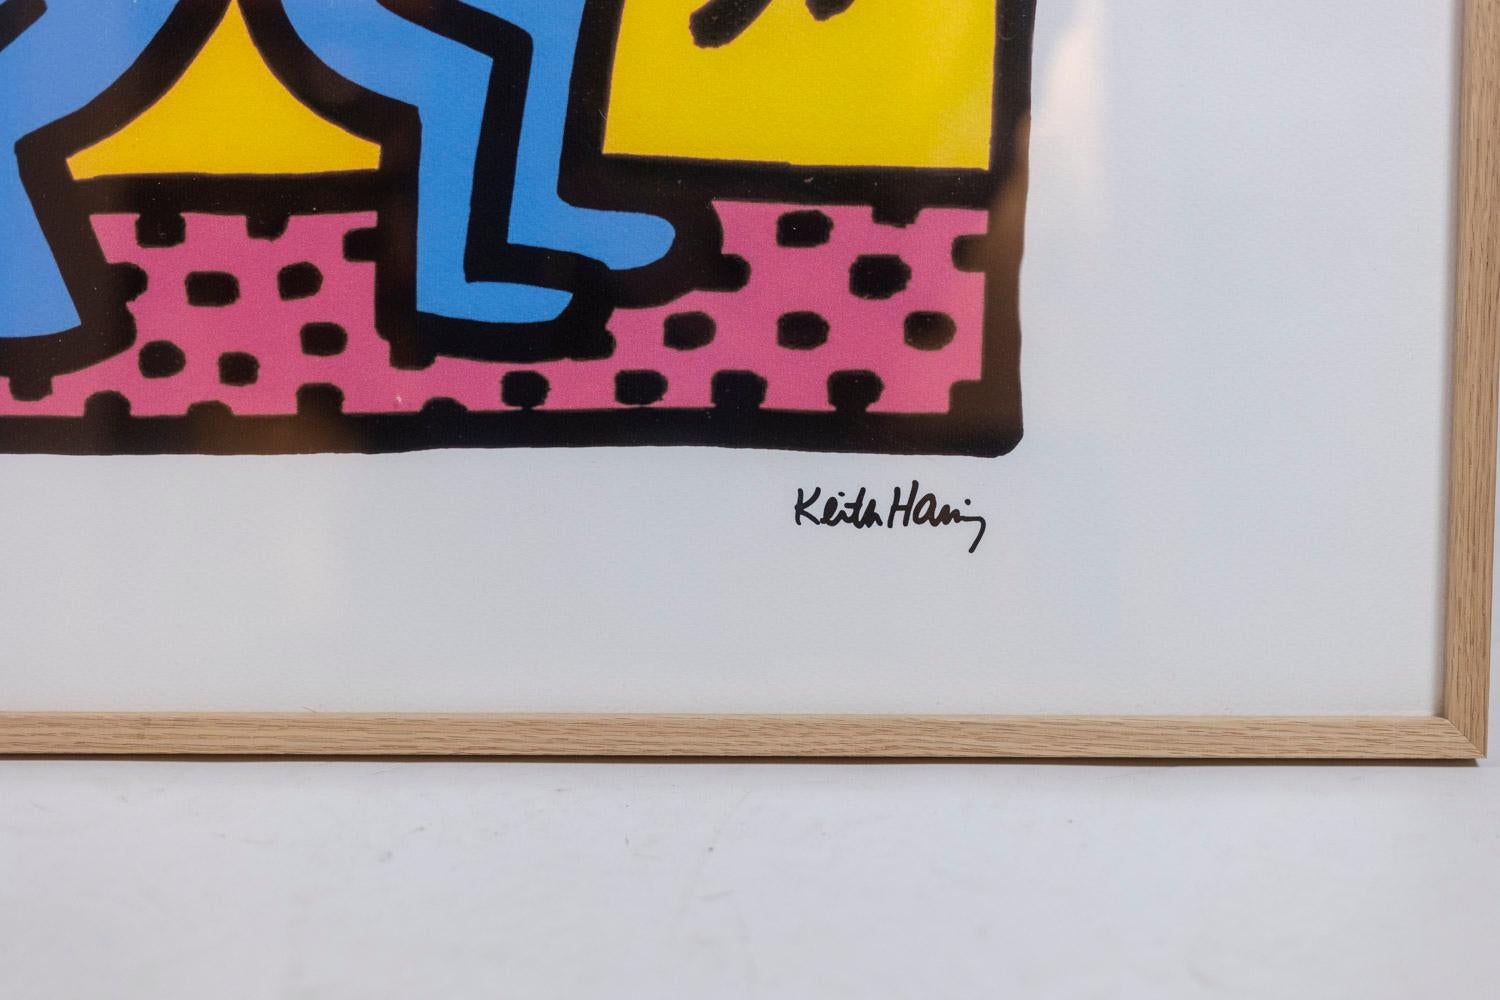 Oak Keith Haring, Lithography, 1990s